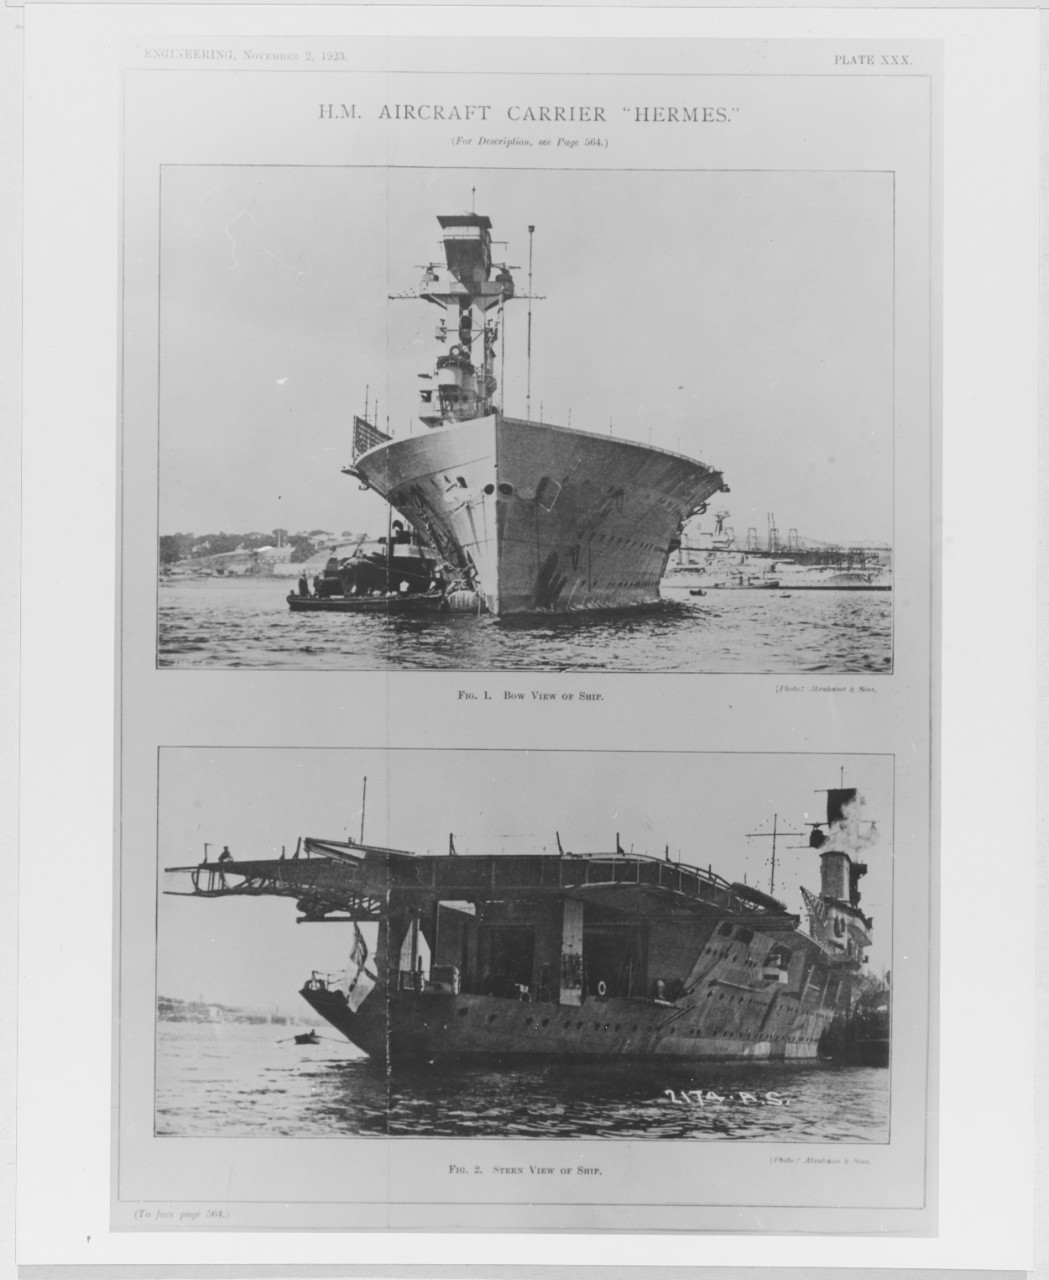 H.M.S. HERMES (BRITISH AIRCRAFT CARRIER, 1919)